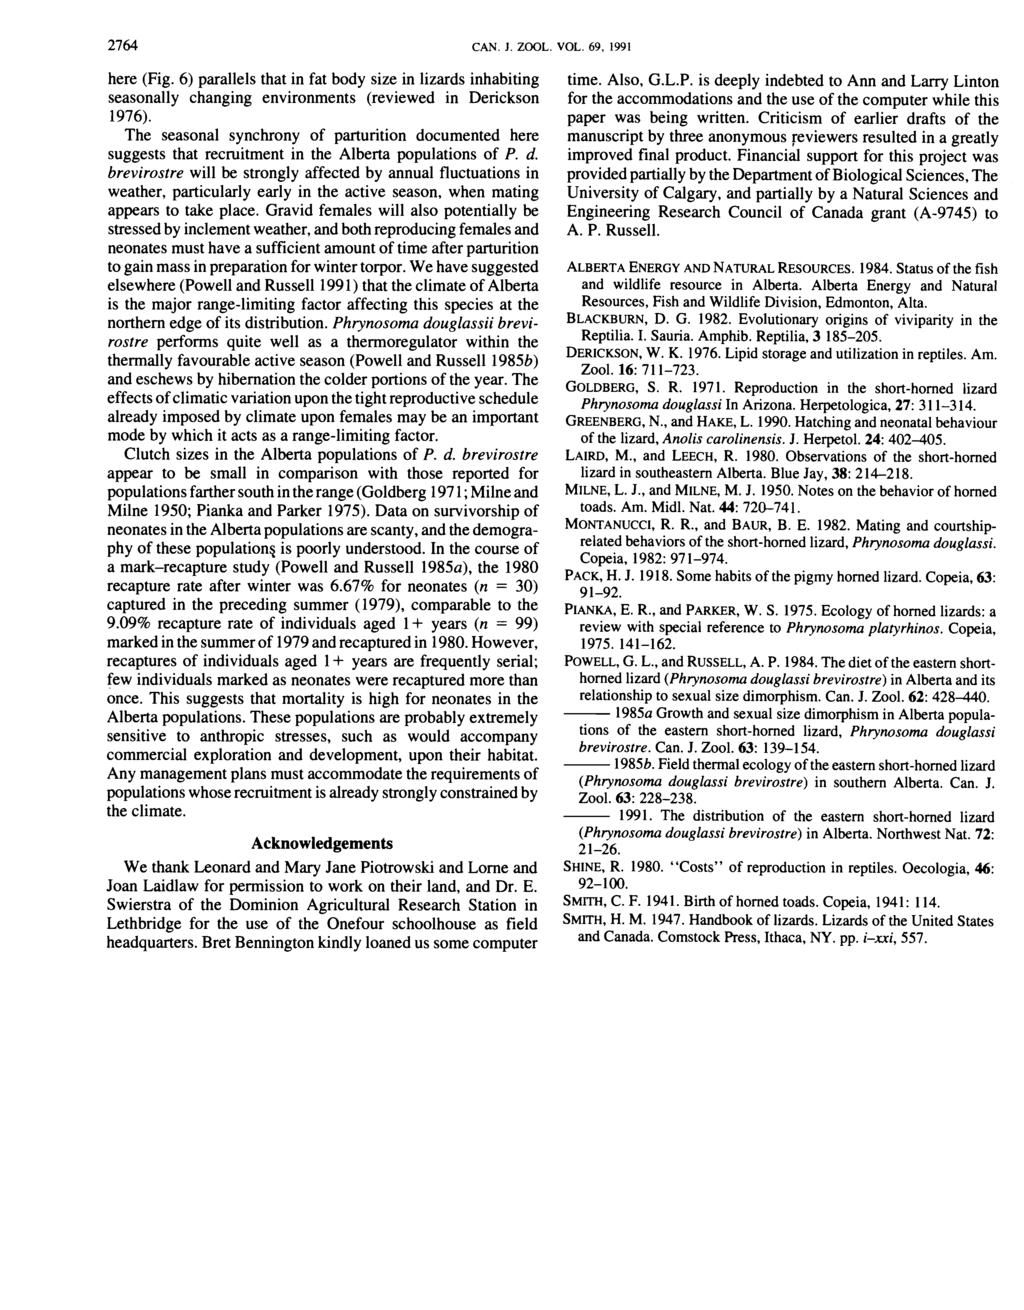 2764 CAN. J. ZOOL. VOL. 69, 1991 here (Fig. 6) parallels that in fat body size in lizards inhabiting seasonally changing environments (reviewed in Derickson 1976).